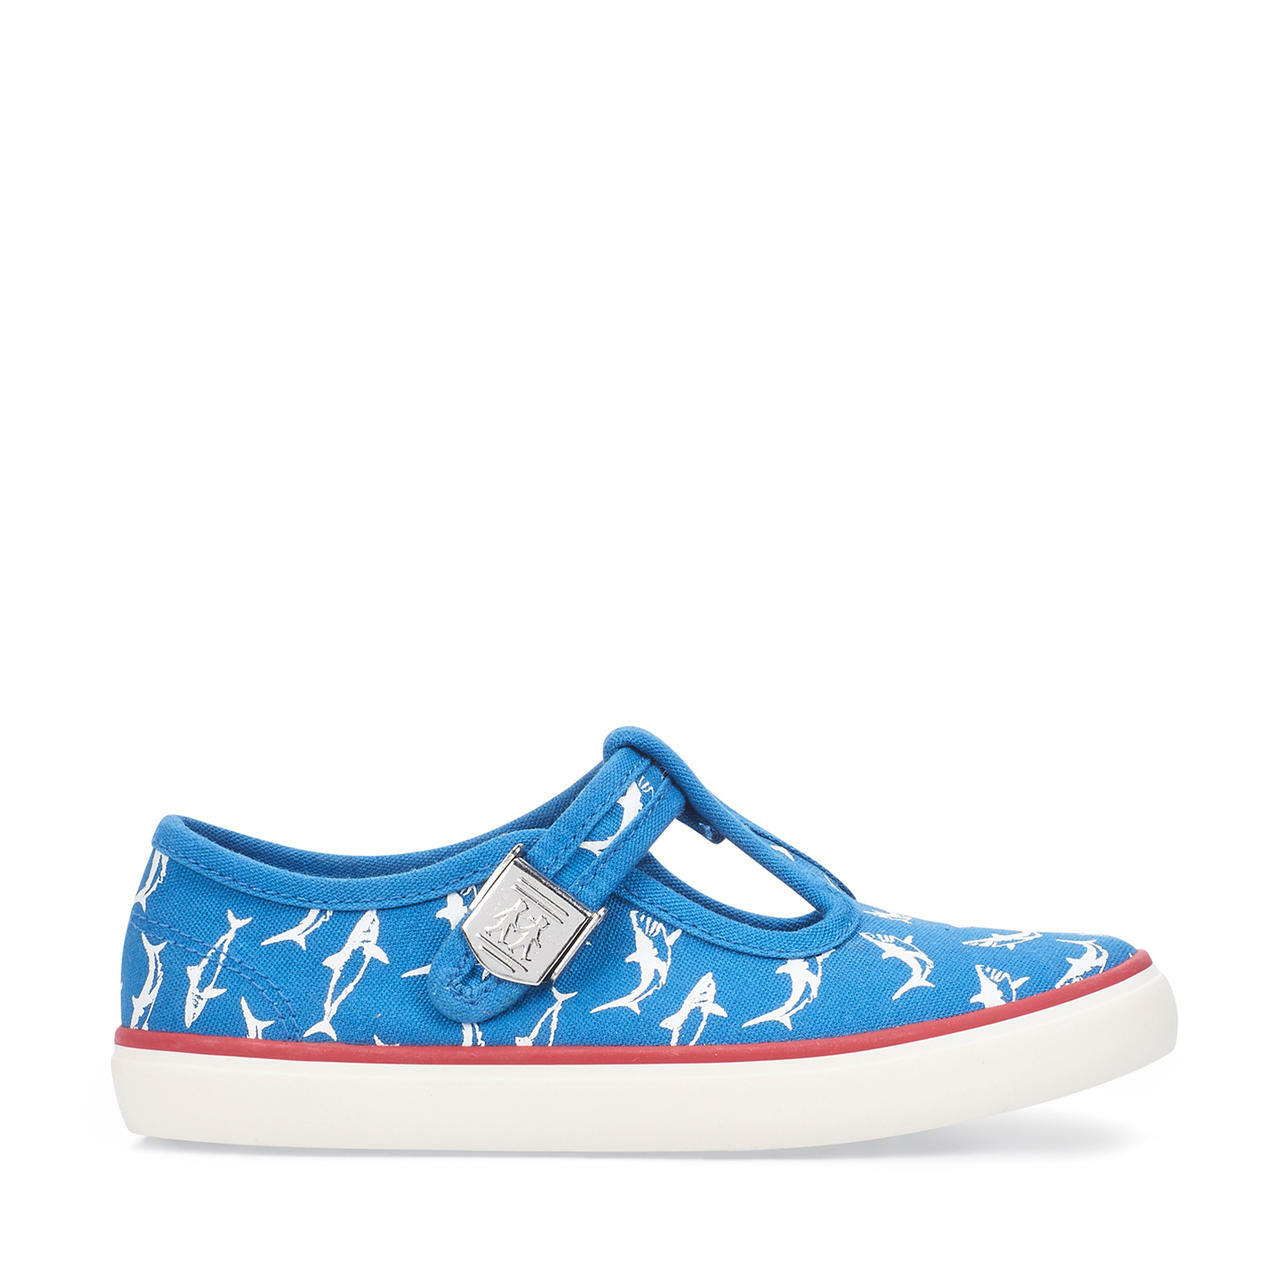 A boys canvas T-Bar shoe by Start Rite, style Surf, in blue with white shark print and buckle fastening.Right side view. 